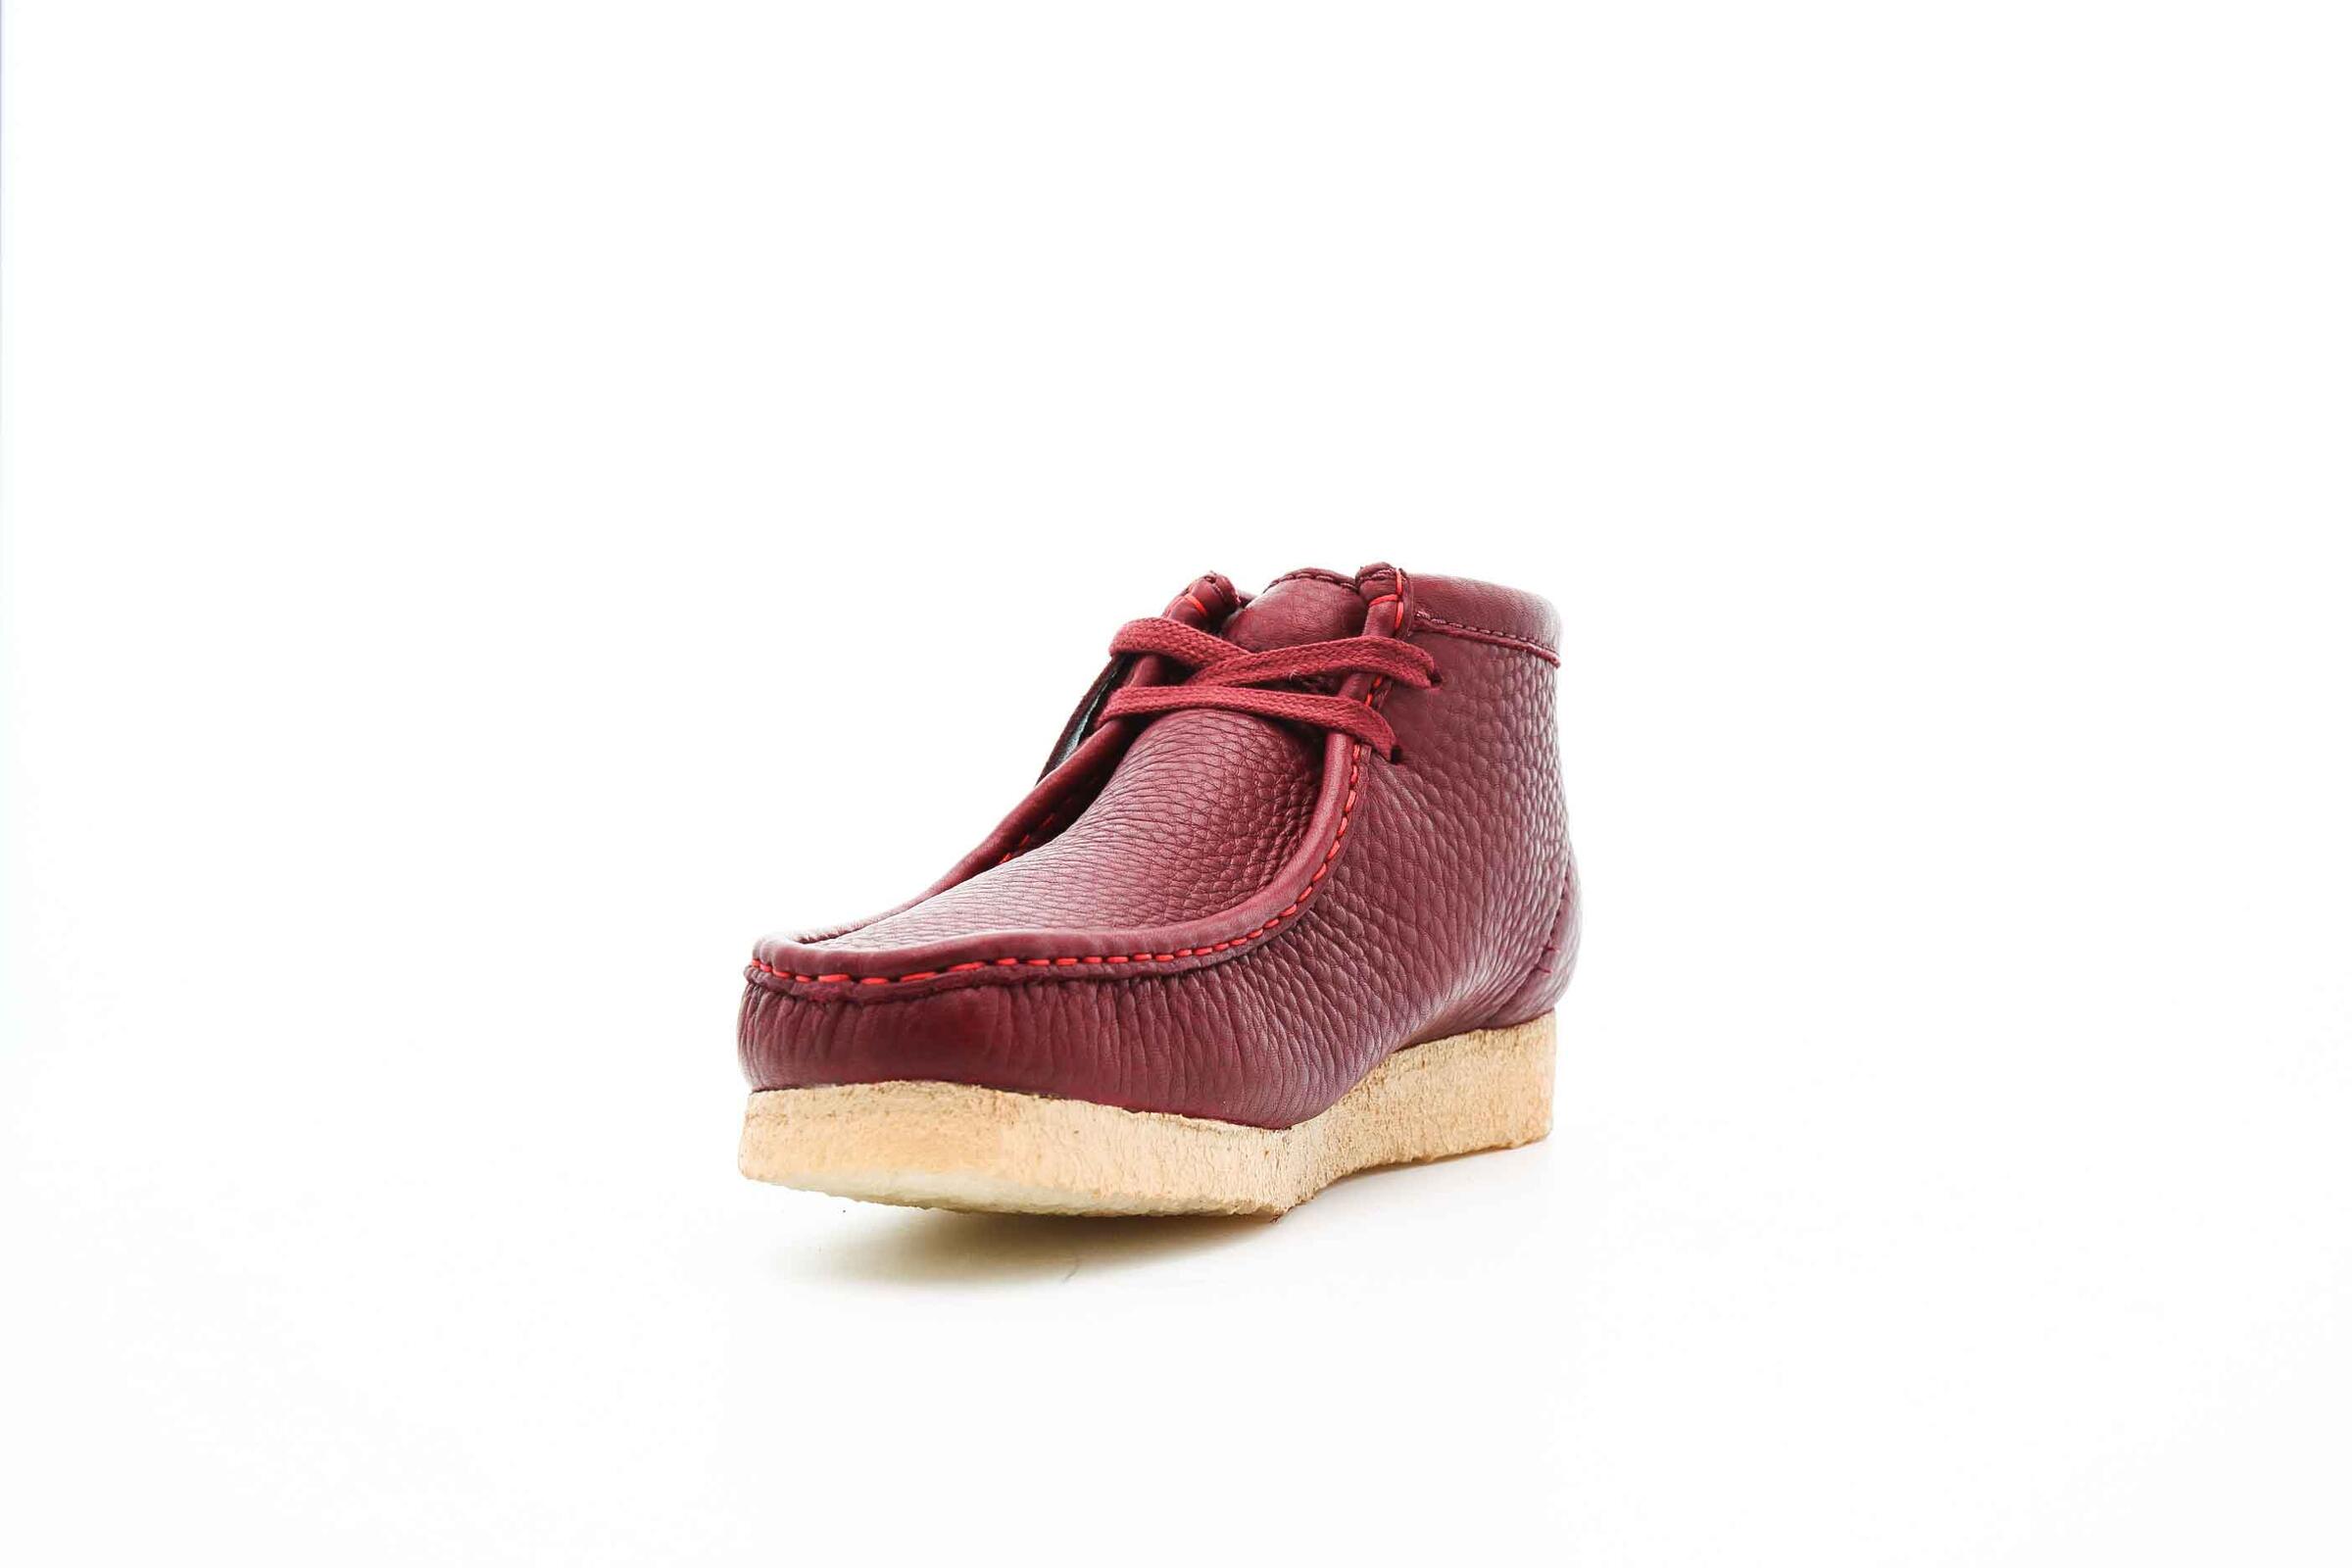 Clarks Originals x SPORTY AND RICH WALLABEE BOOT "BURGUNDY"